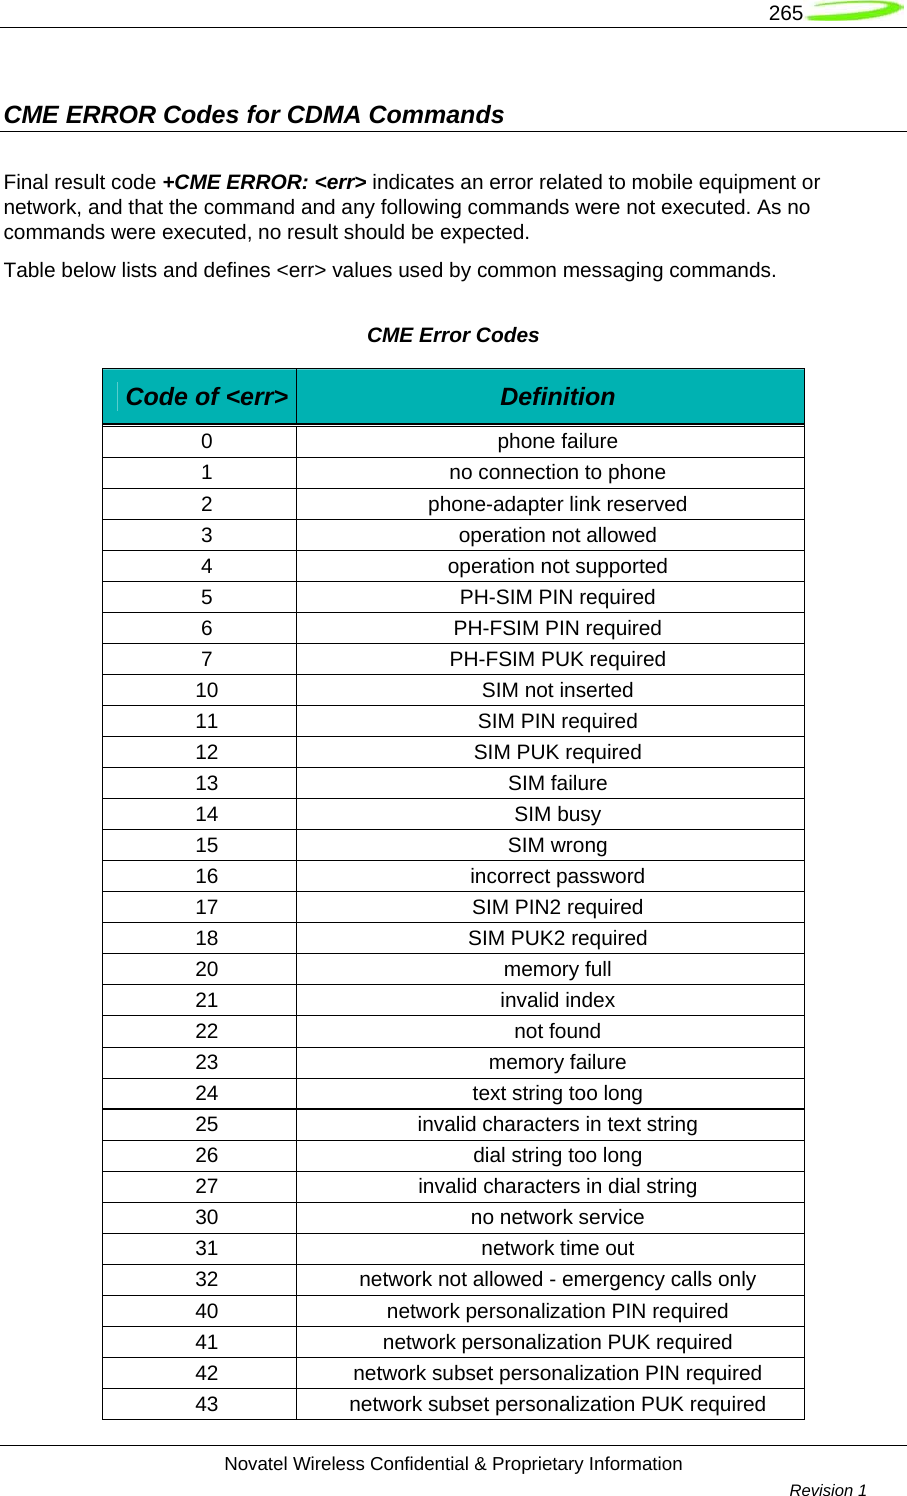   265  Novatel Wireless Confidential &amp; Proprietary Information        Revision 1   CME ERROR Codes for CDMA Commands  Final result code +CME ERROR: &lt;err&gt; indicates an error related to mobile equipment or network, and that the command and any following commands were not executed. As no commands were executed, no result should be expected.  Table below lists and defines &lt;err&gt; values used by common messaging commands. CME Error Codes Code of &lt;err&gt;  Definition 0 phone failure 1  no connection to phone 2 phone-adapter link reserved 3 operation not allowed 4 operation not supported 5  PH-SIM PIN required 6  PH-FSIM PIN required 7  PH-FSIM PUK required 10  SIM not inserted 11  SIM PIN required 12  SIM PUK required 13 SIM failure 14 SIM busy 15 SIM wrong 16 incorrect password 17  SIM PIN2 required 18  SIM PUK2 required 20 memory full 21 invalid index 22 not found 23 memory failure 24  text string too long 25  invalid characters in text string 26  dial string too long 27  invalid characters in dial string 30  no network service 31 network time out 32  network not allowed - emergency calls only 40  network personalization PIN required 41  network personalization PUK required 42  network subset personalization PIN required 43  network subset personalization PUK required 